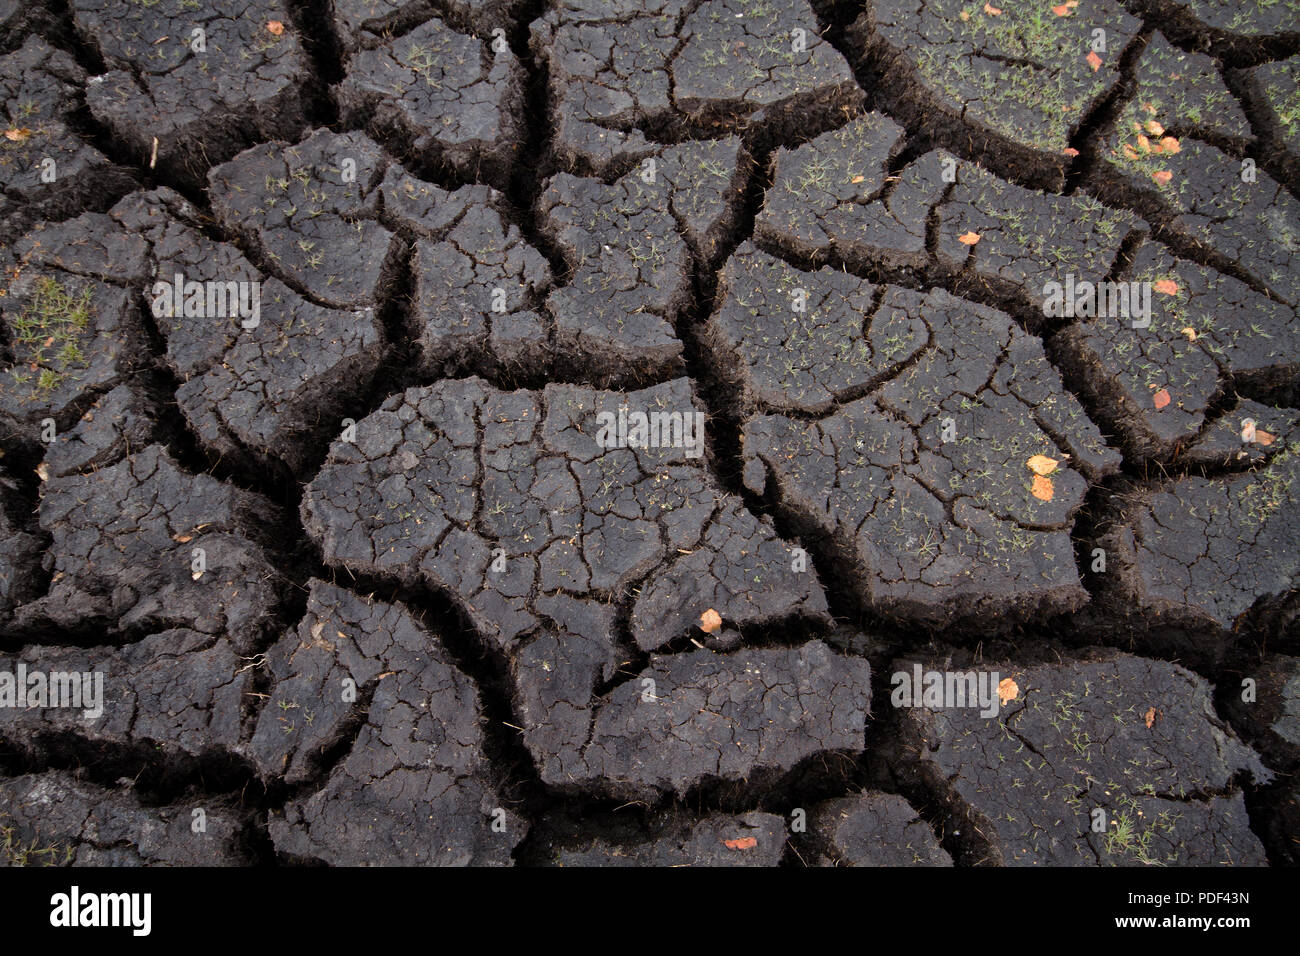 Climate change and global warming: heat and drought causing cracked soil Stock Photo